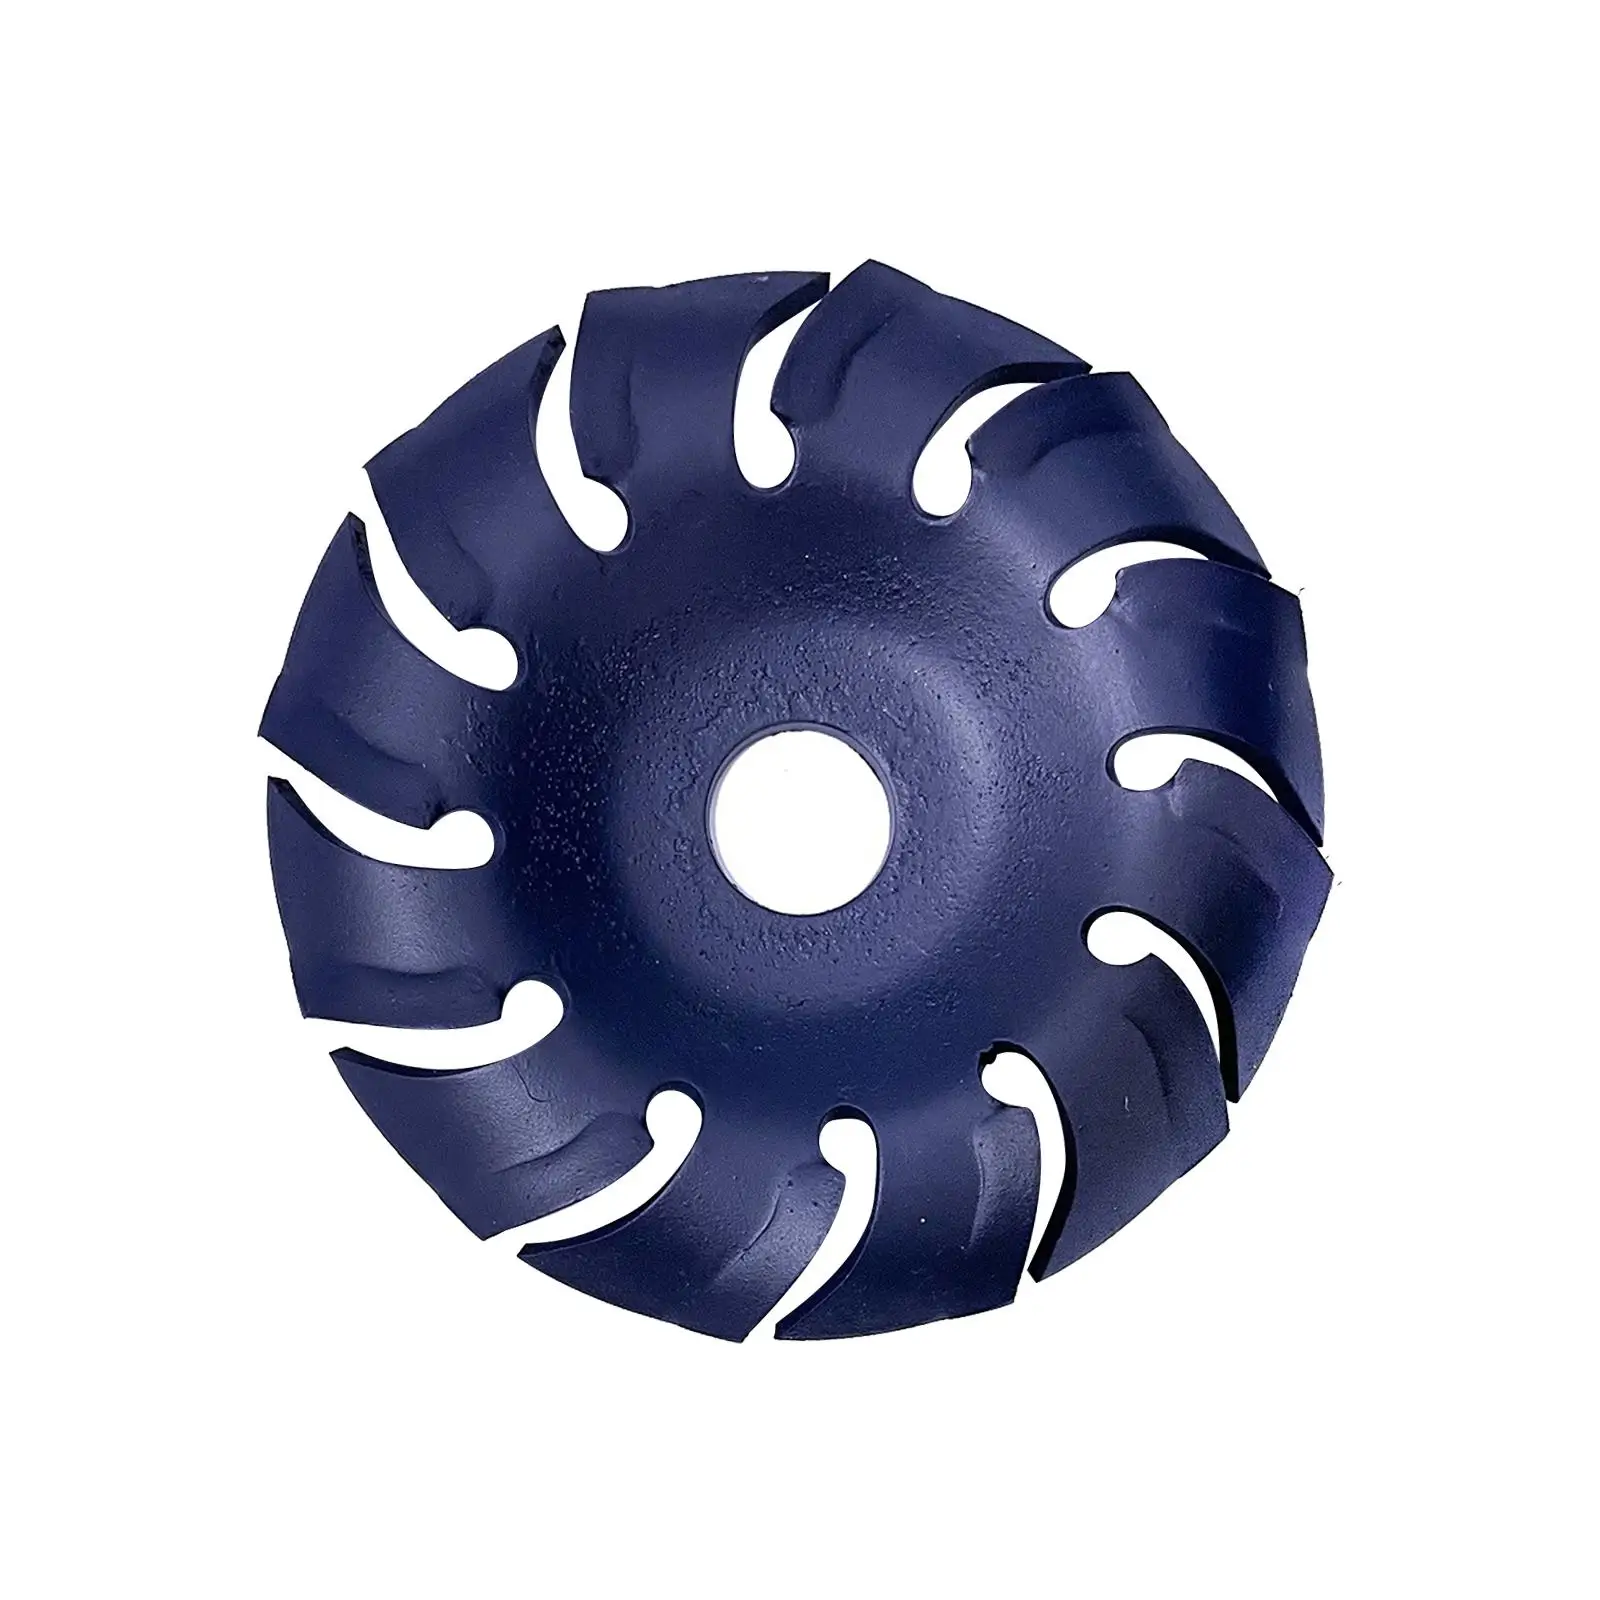 125mm Angle Grinder Disc Sanding Carving Disc Wood Polishing Shaping Disc Wood Carving Disc for Grinding Cutting